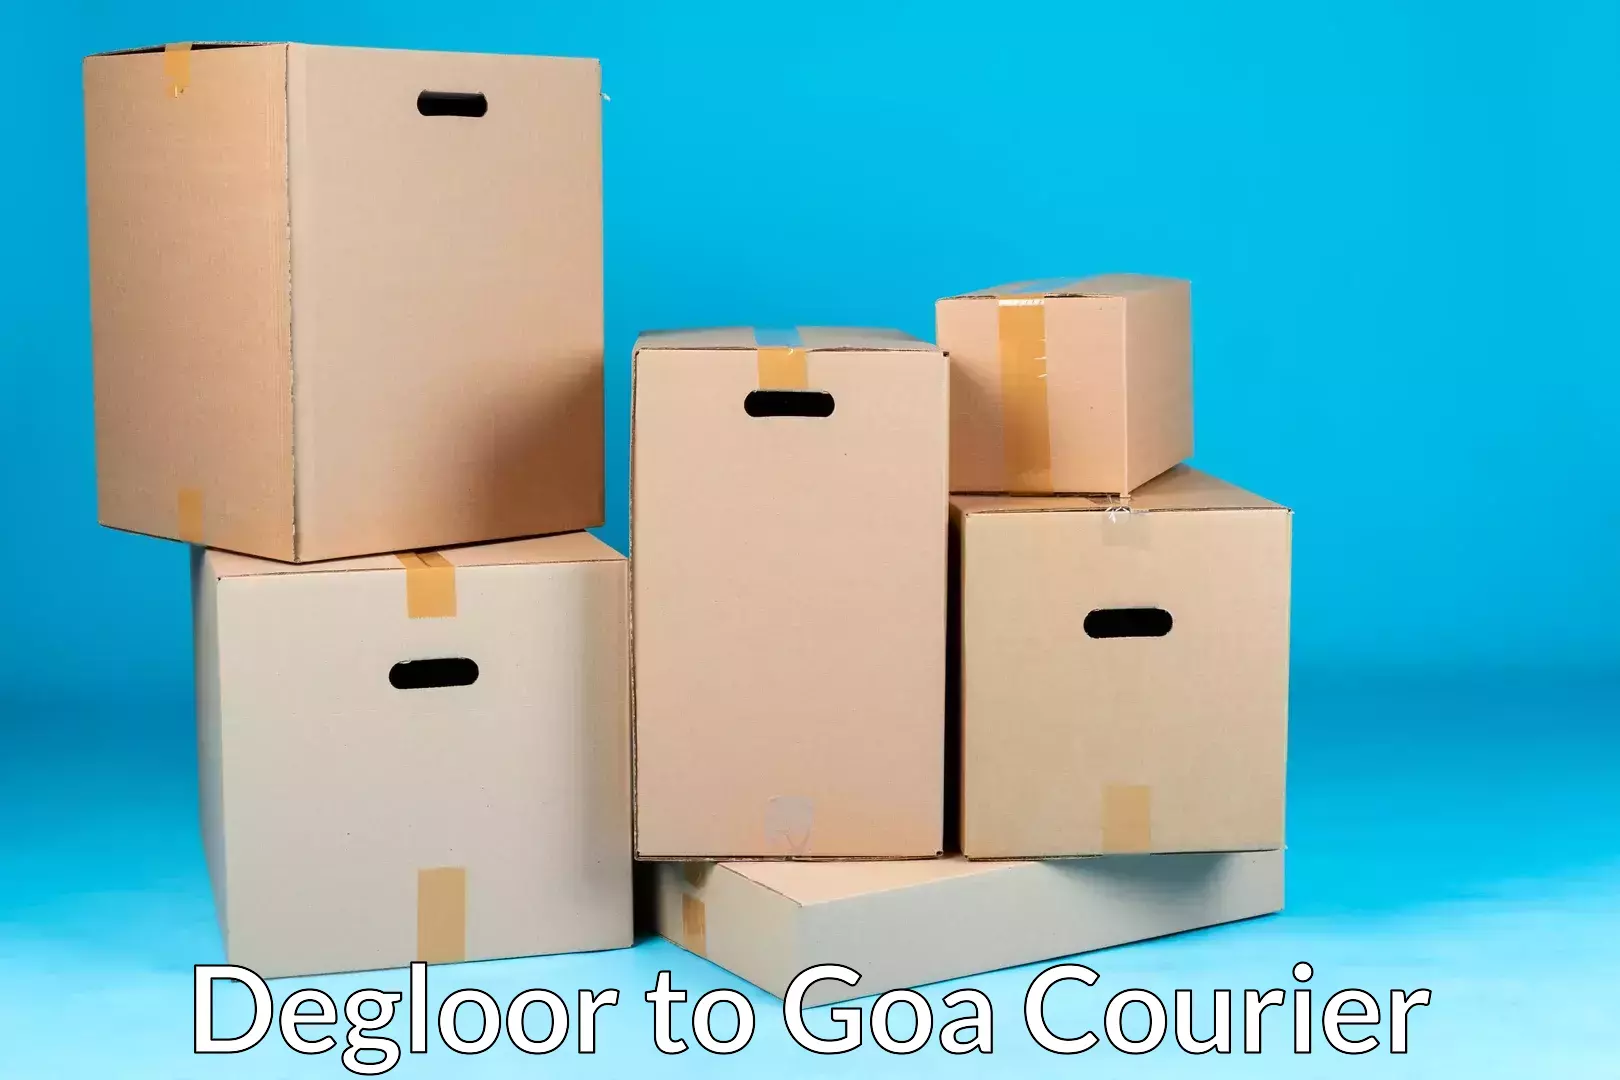 Home shifting experts Degloor to South Goa